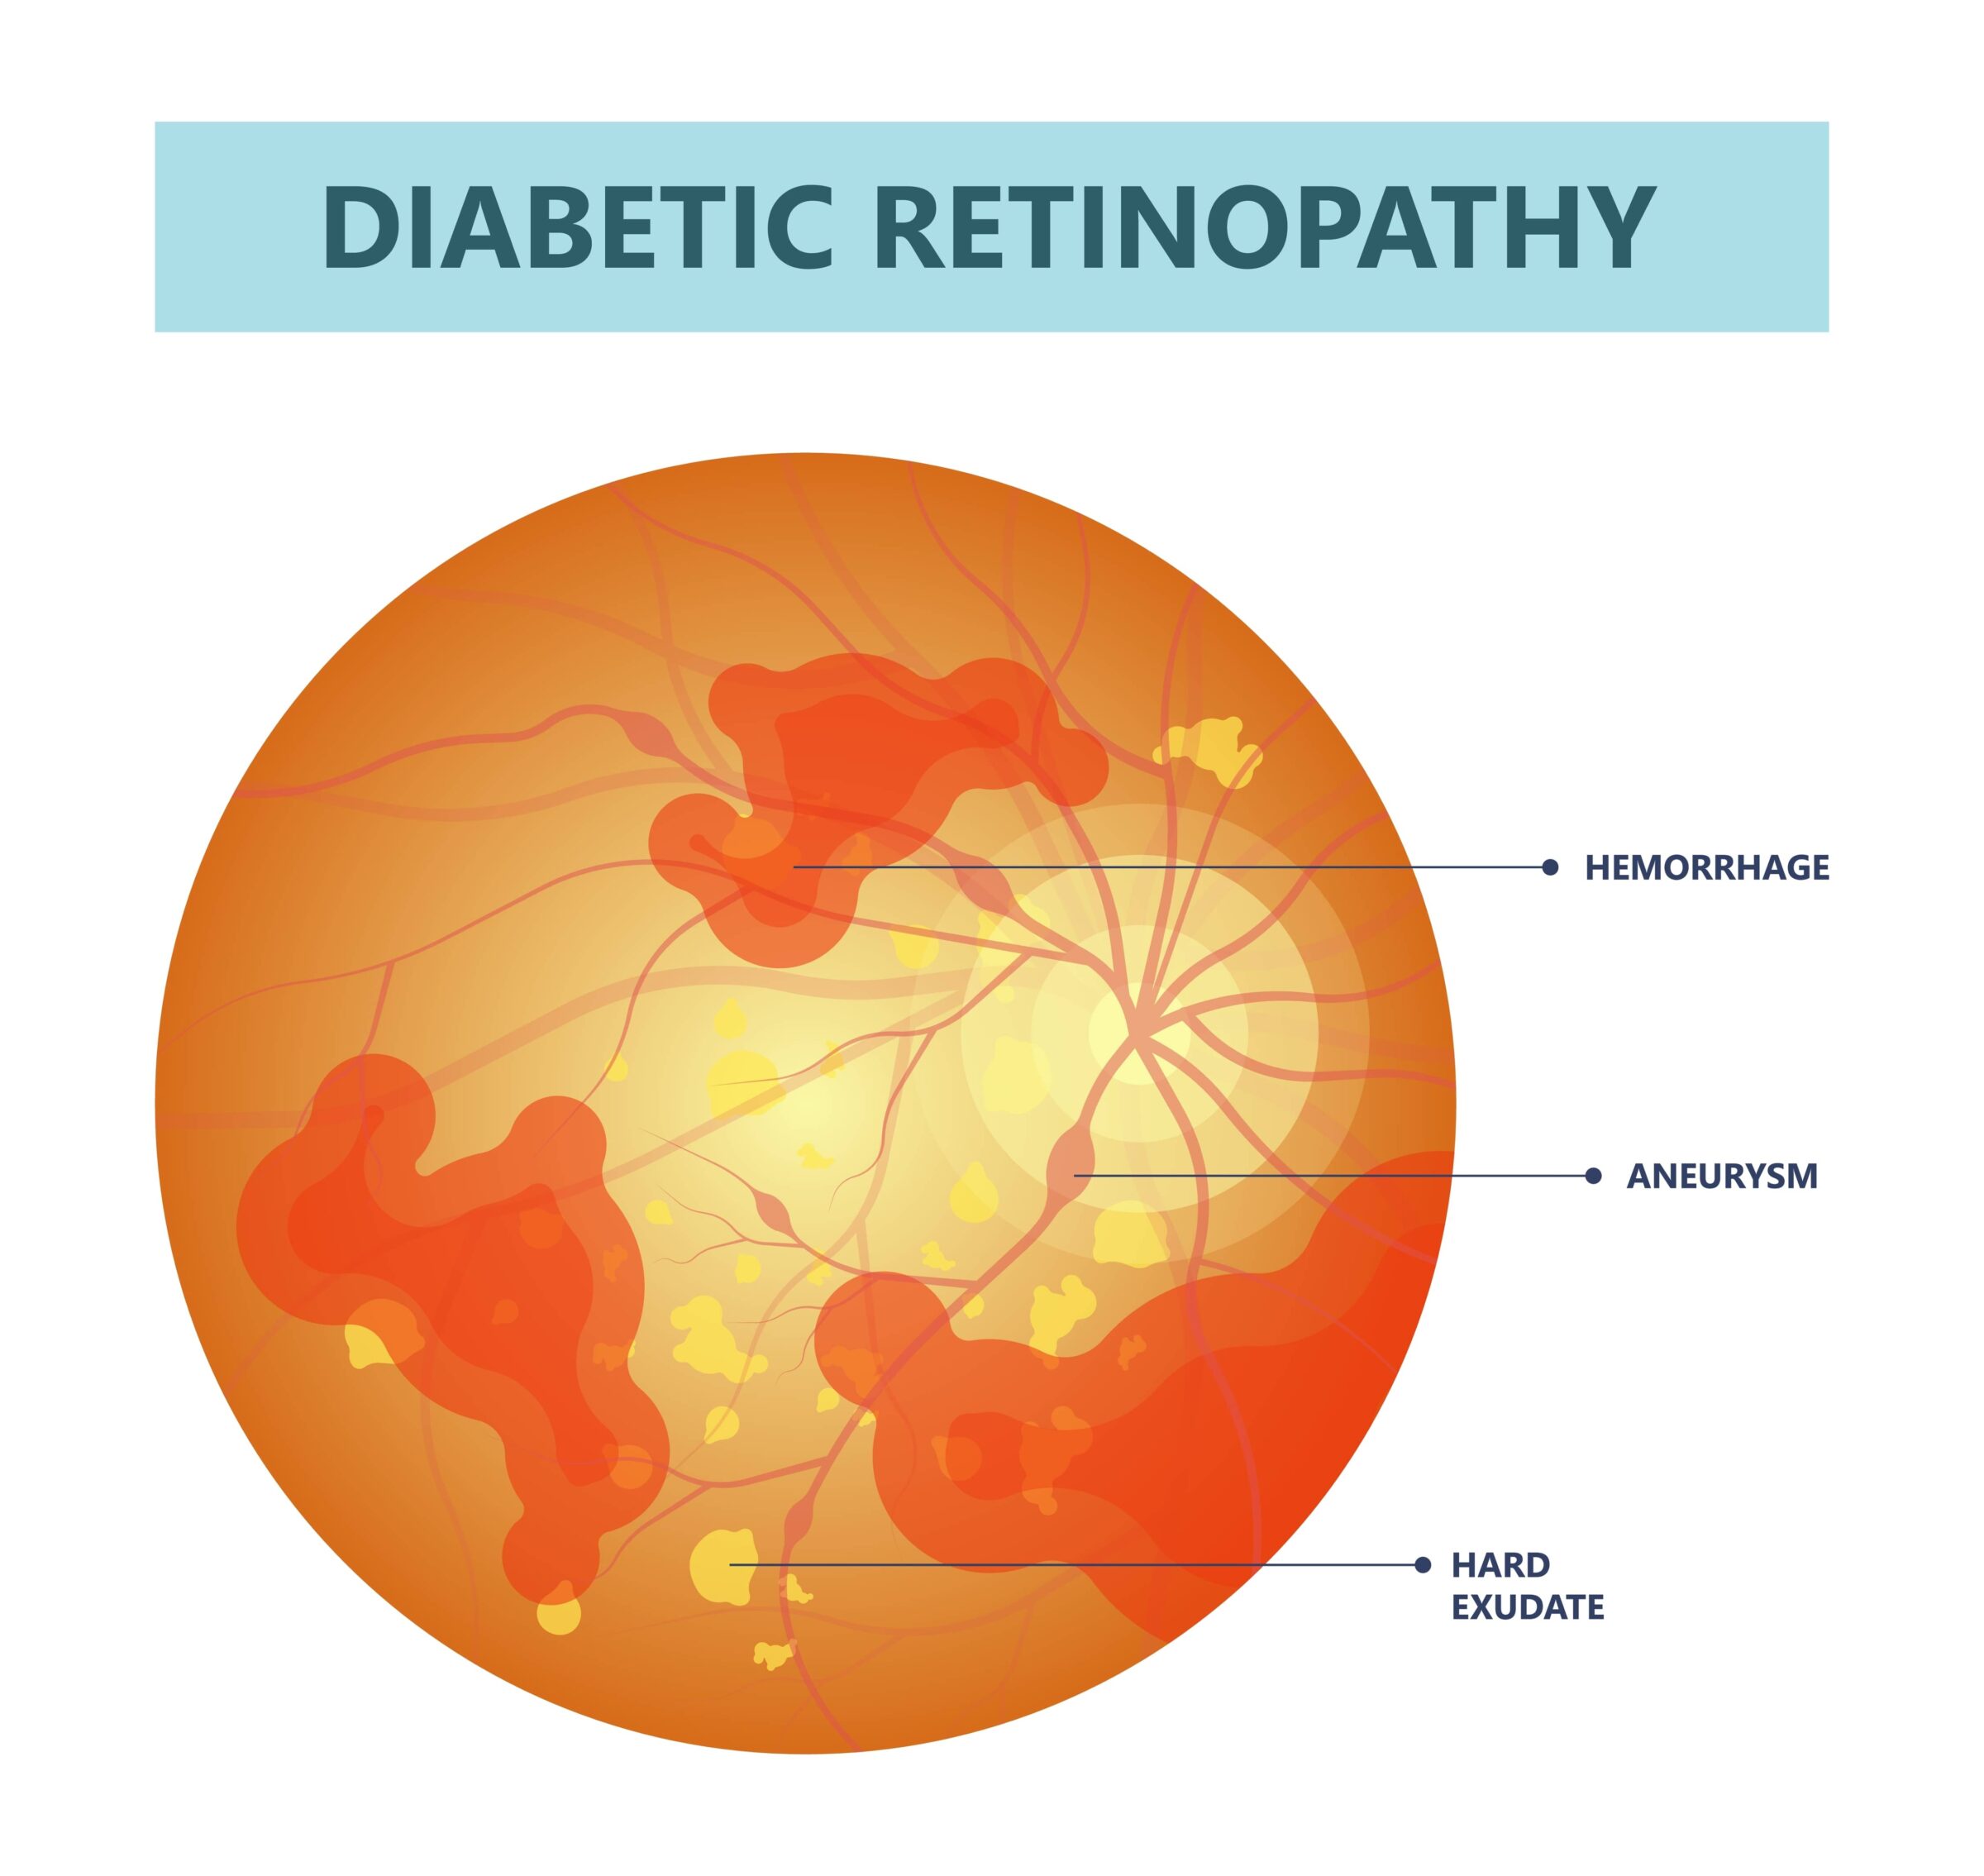 Diabetes can cause damage to the blood vessels of the retina, known as diabetic retinopathy.